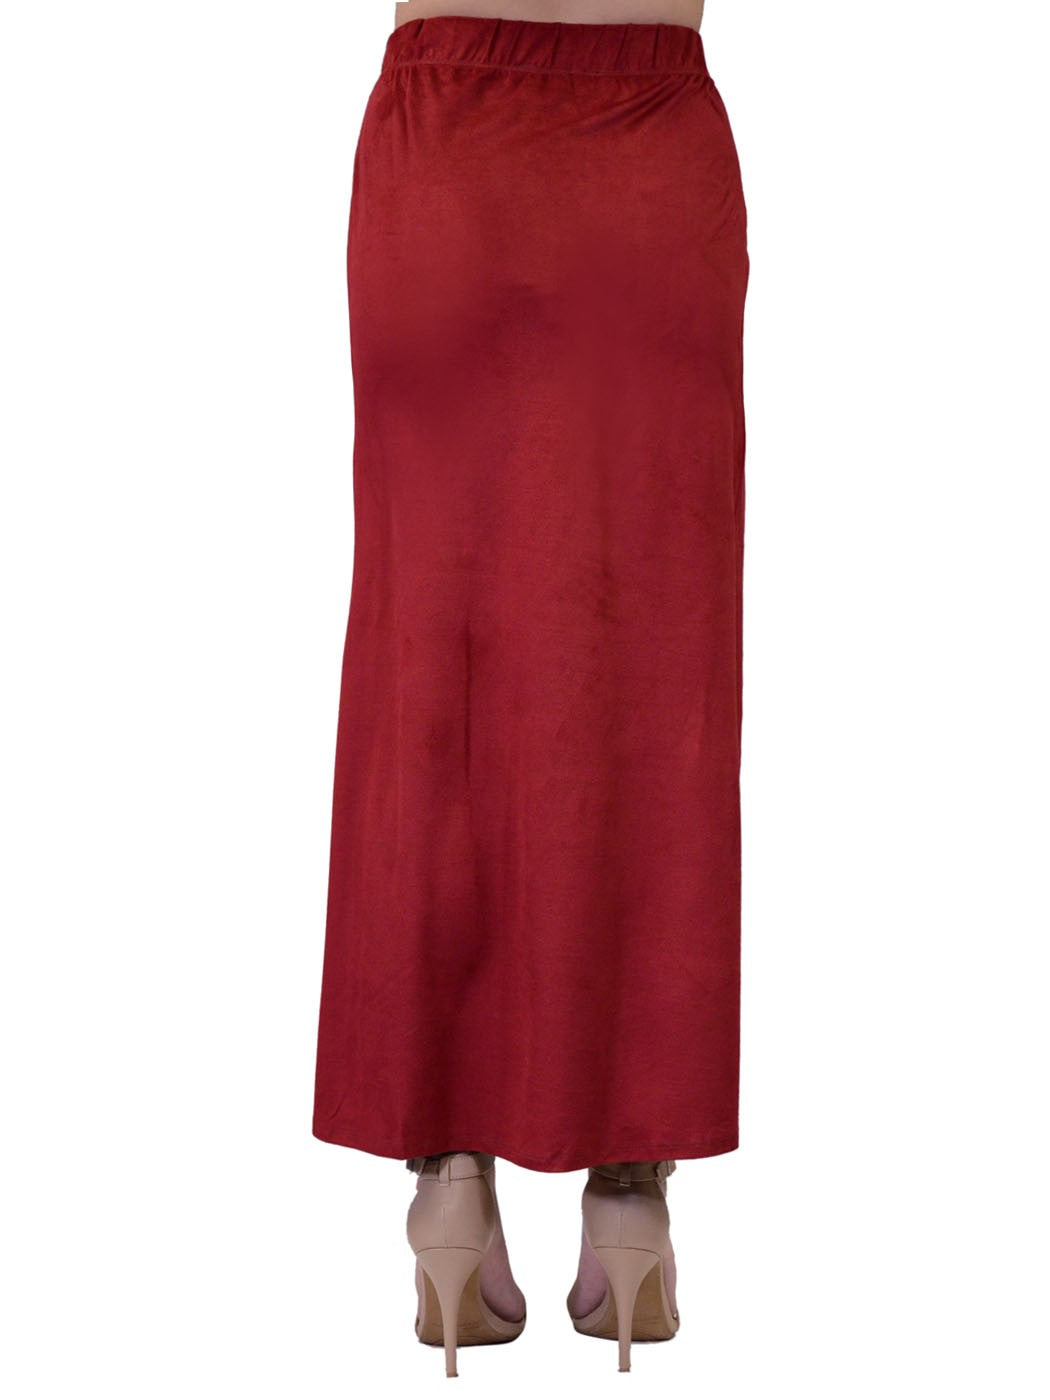 Joyce Sexy Red Suede Body Con Fitted Skirt With Slit And Stretchy Waist Band - ALILANG.COM